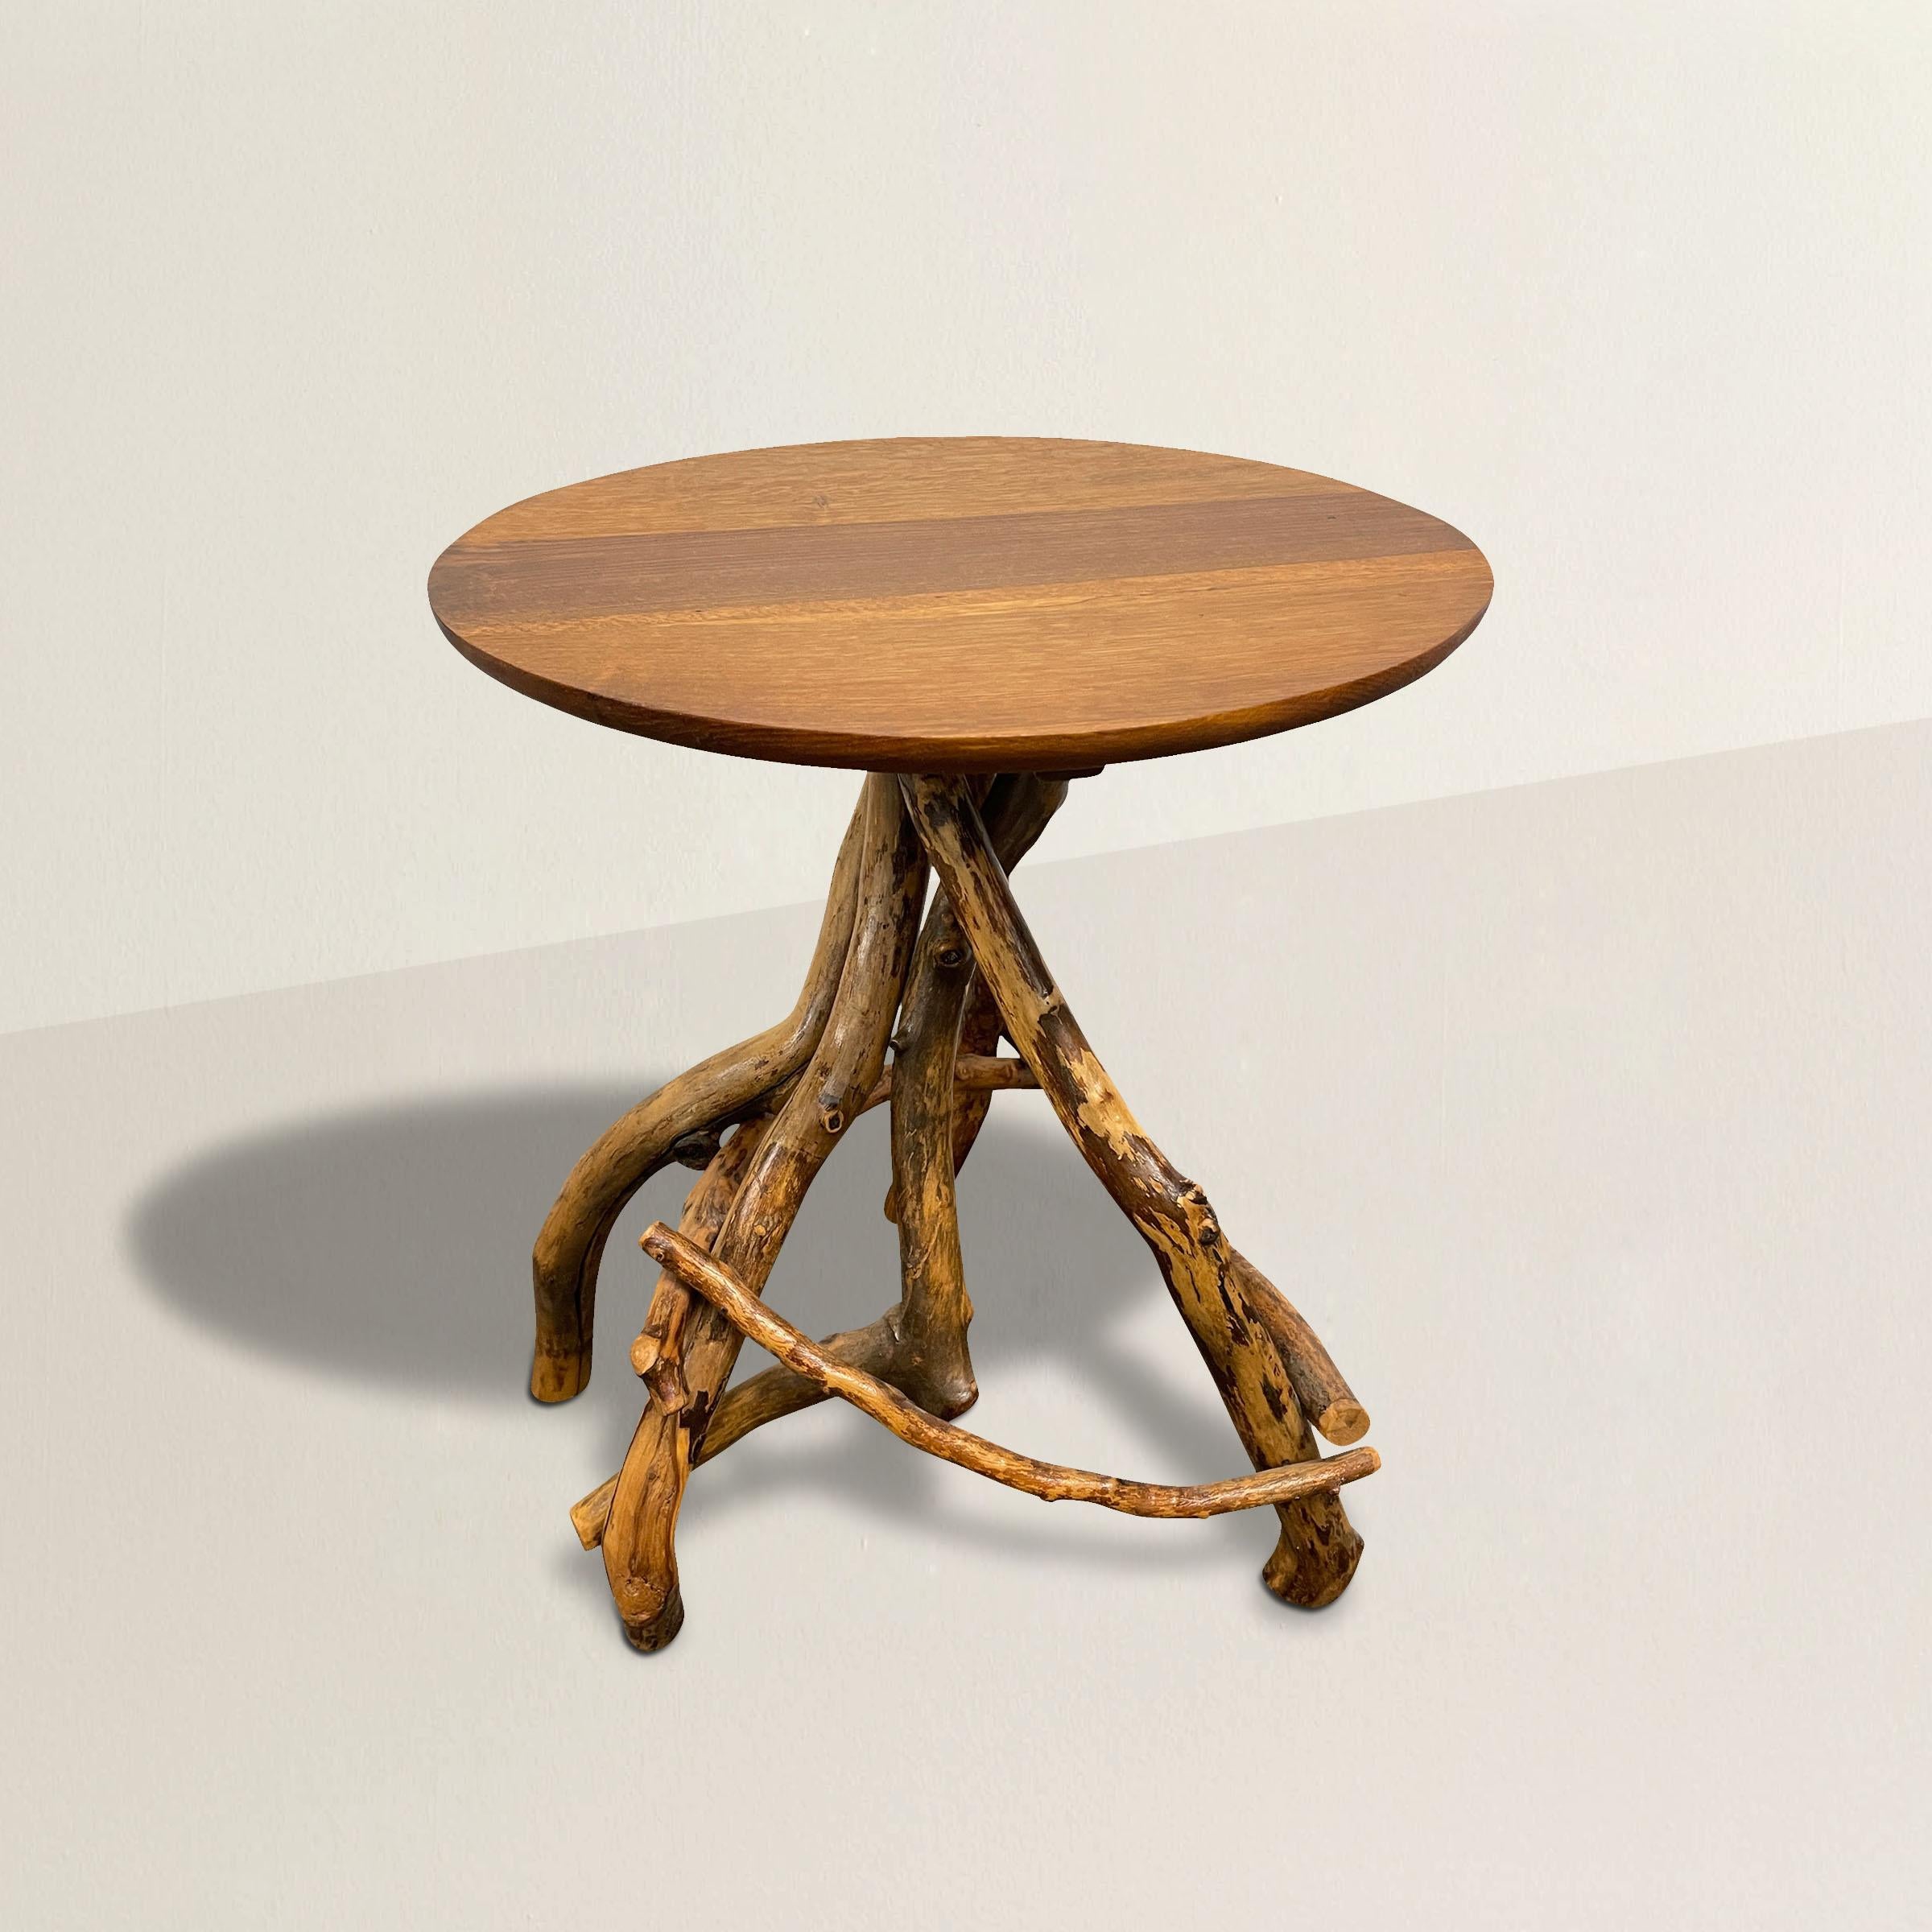 A whimsical 20th century American Adirondack-style rootwood side table with a round oak top, and a base constructed from several gnarly rootwood twigs. The perfect table next to your sofa or favorite reading chair in your cabin.